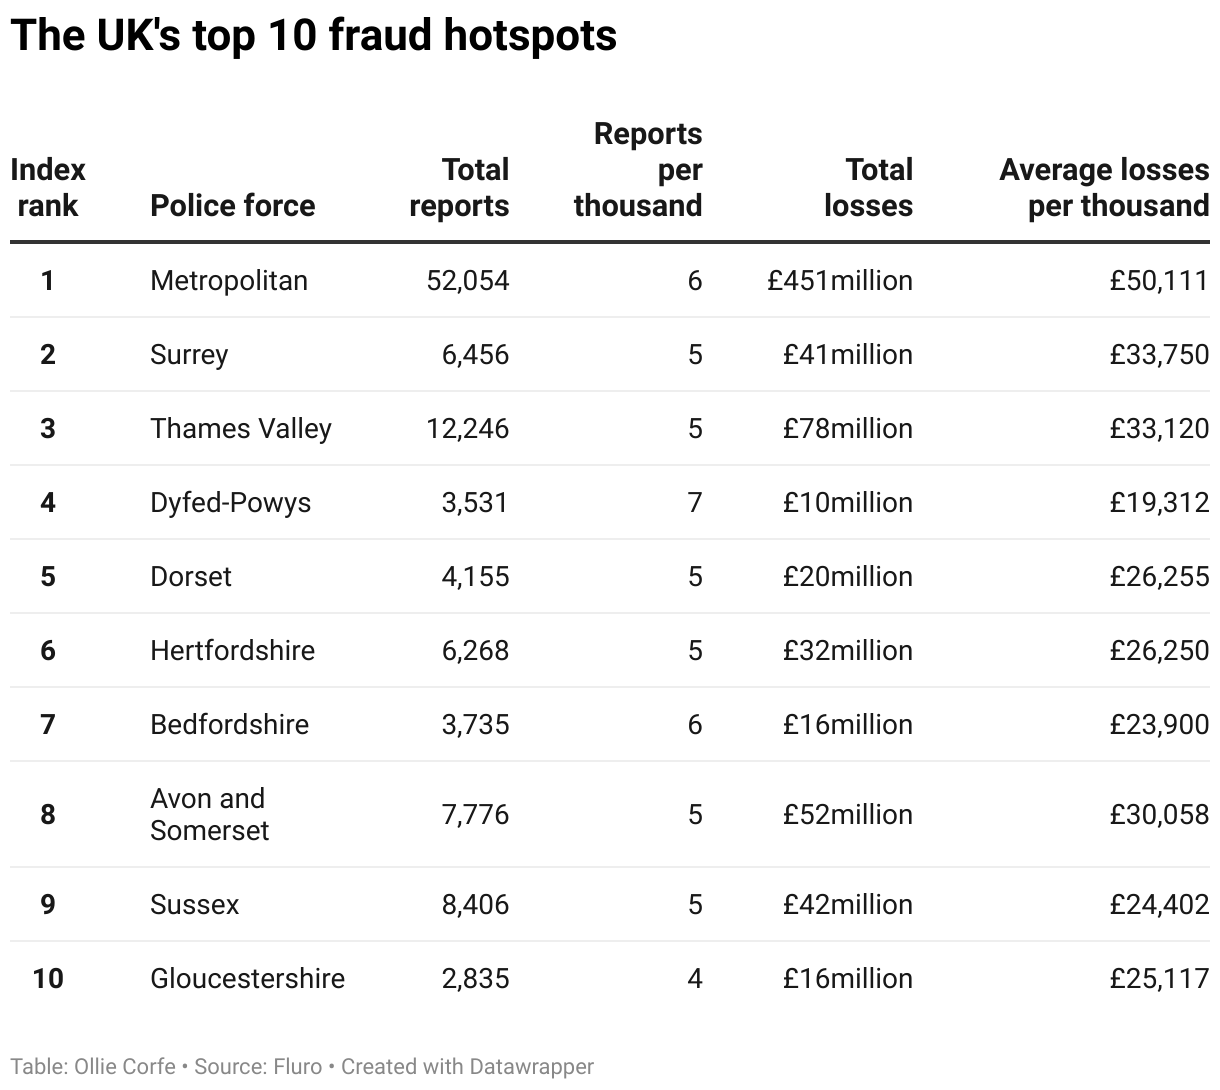 Table of fraud hotspots.